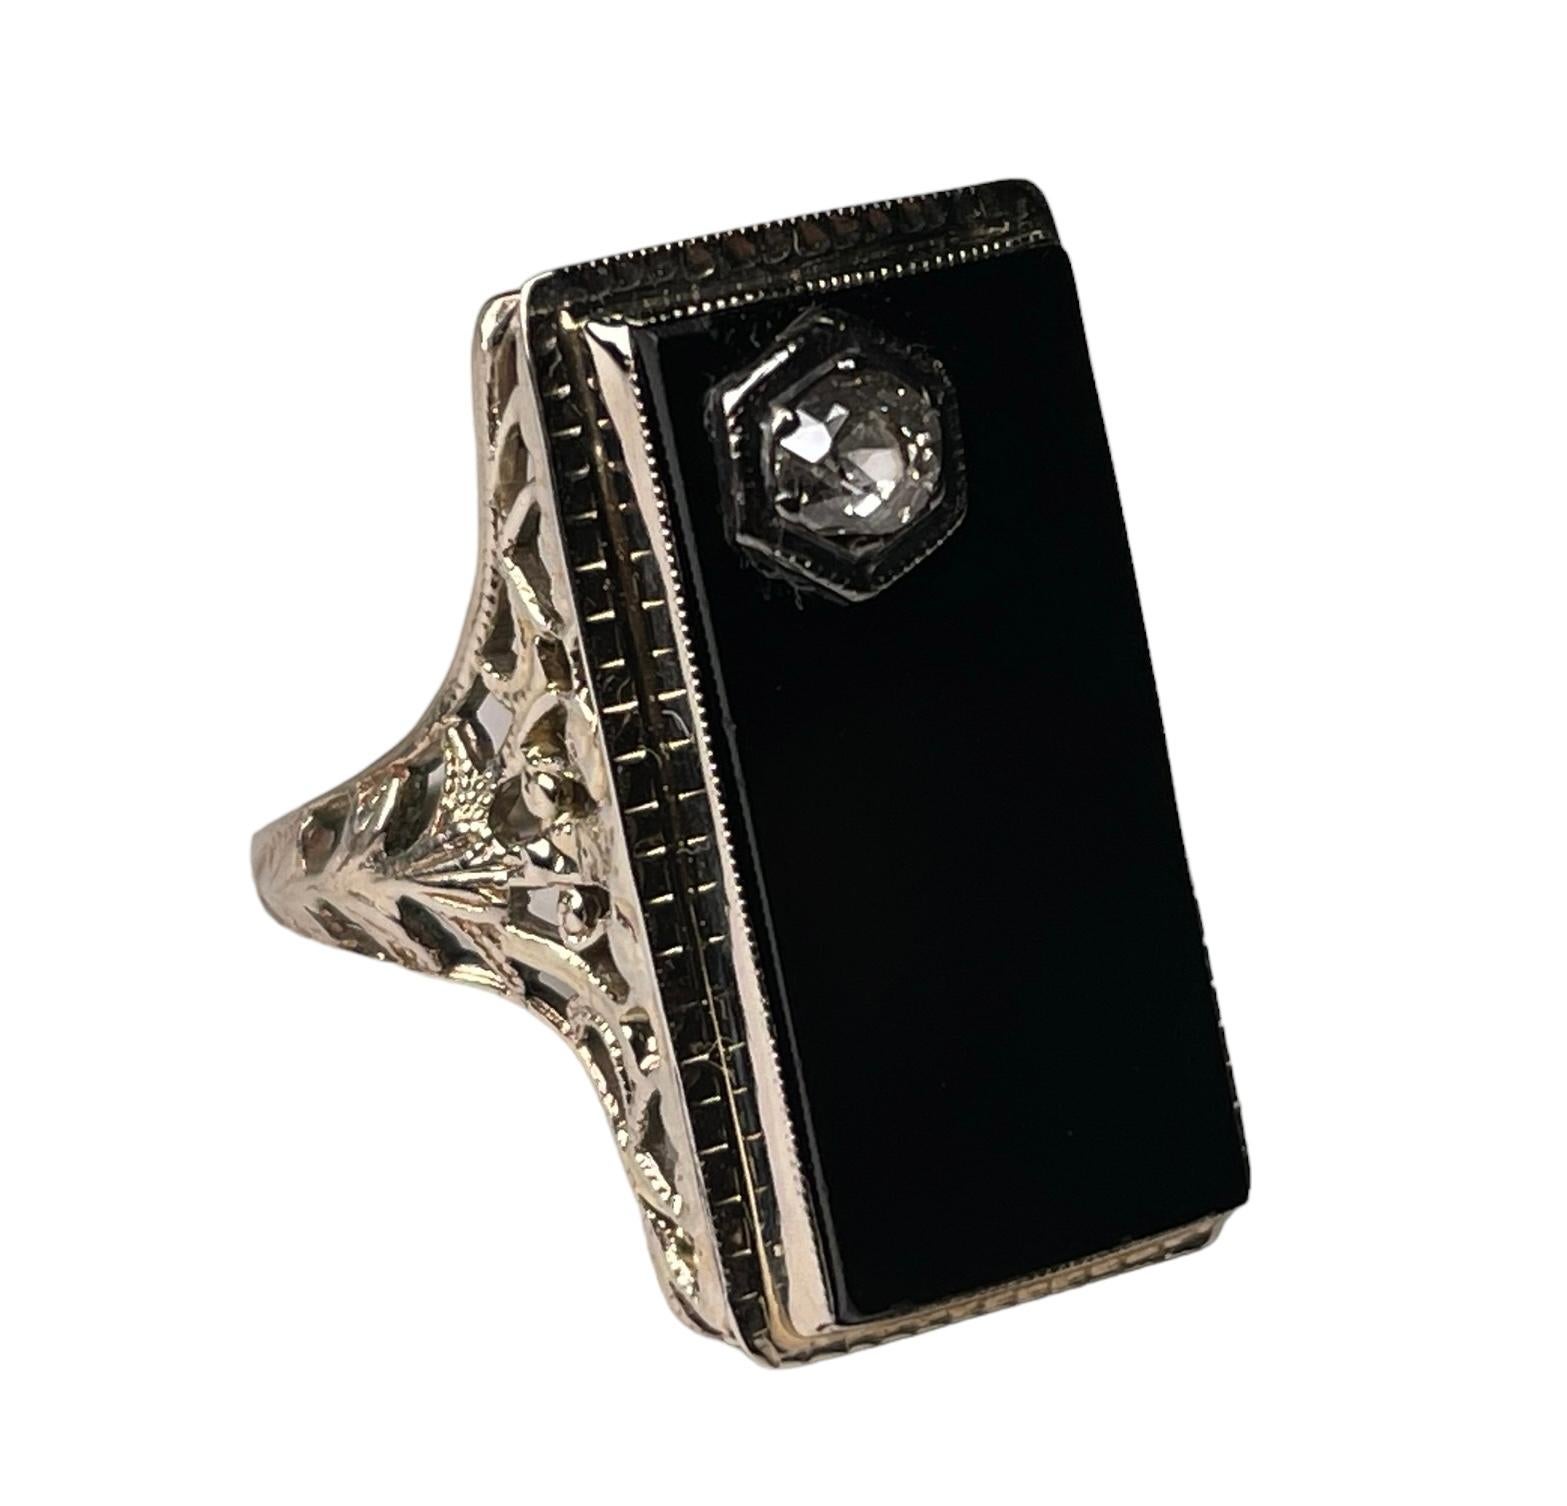 Art Deco 14k White Gold, Diamond and Onyx Cocktail Ring For Sale 2